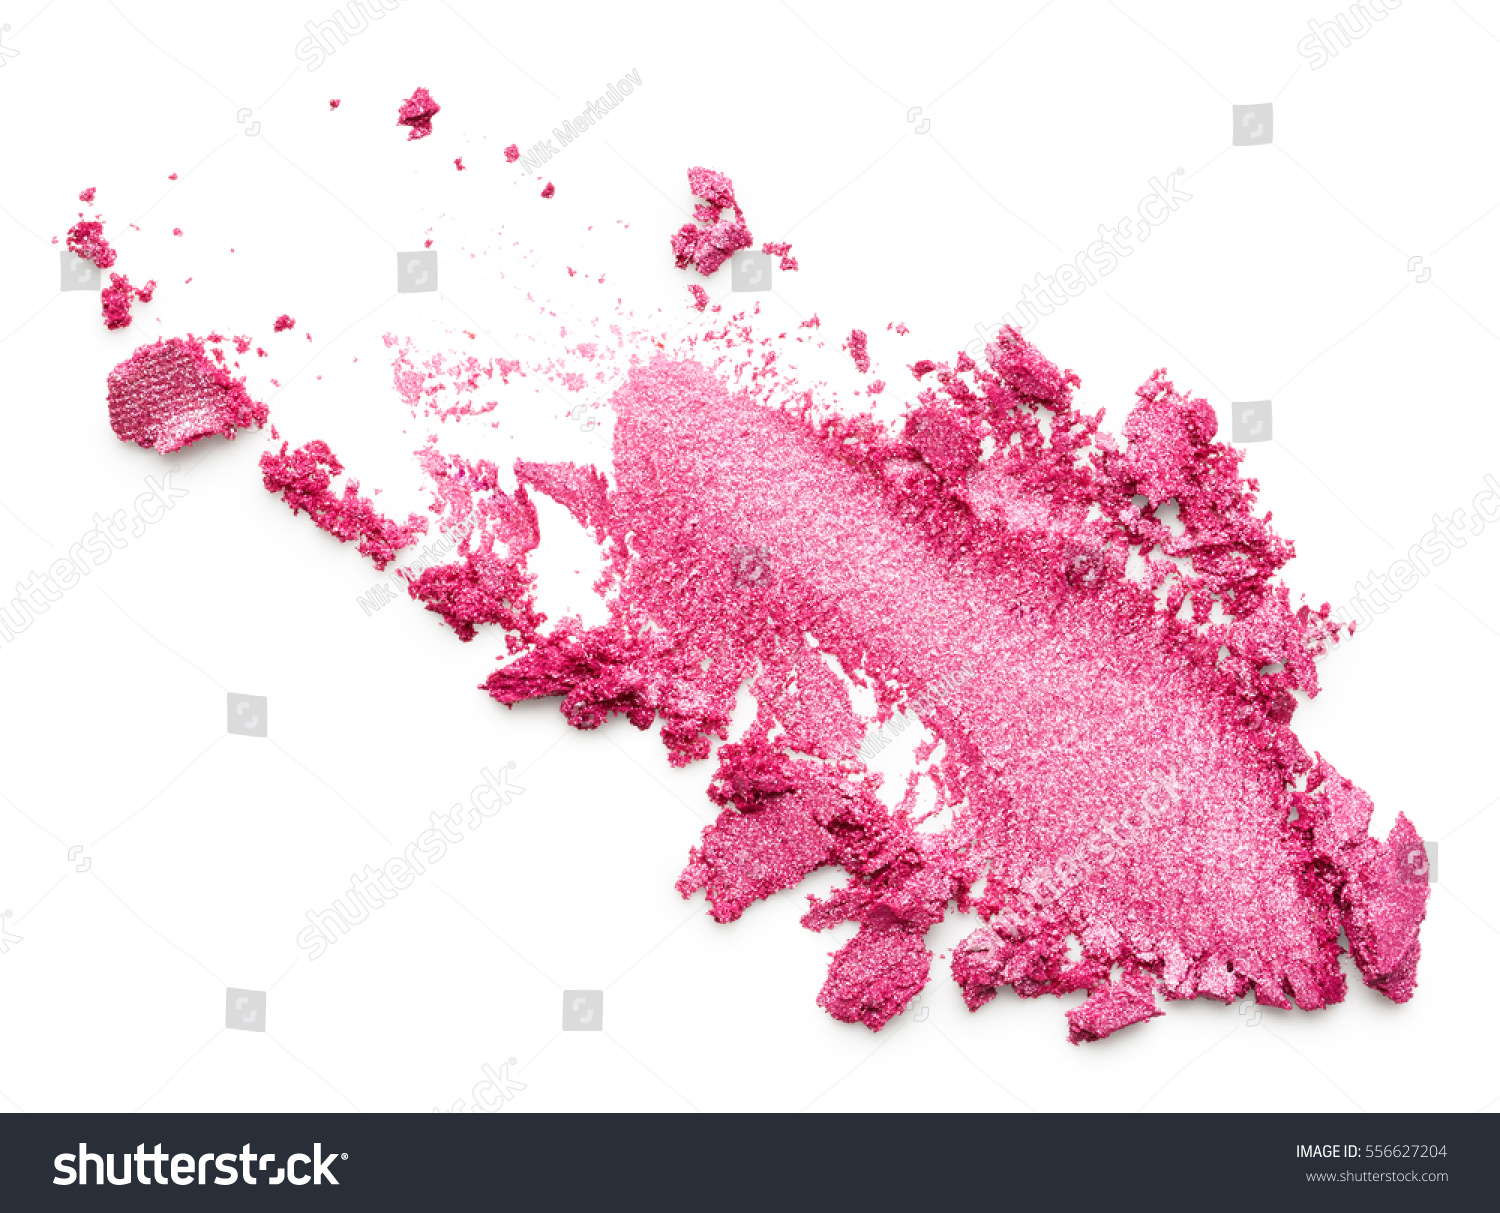 Pink eye shadow isolated on white background #556627204